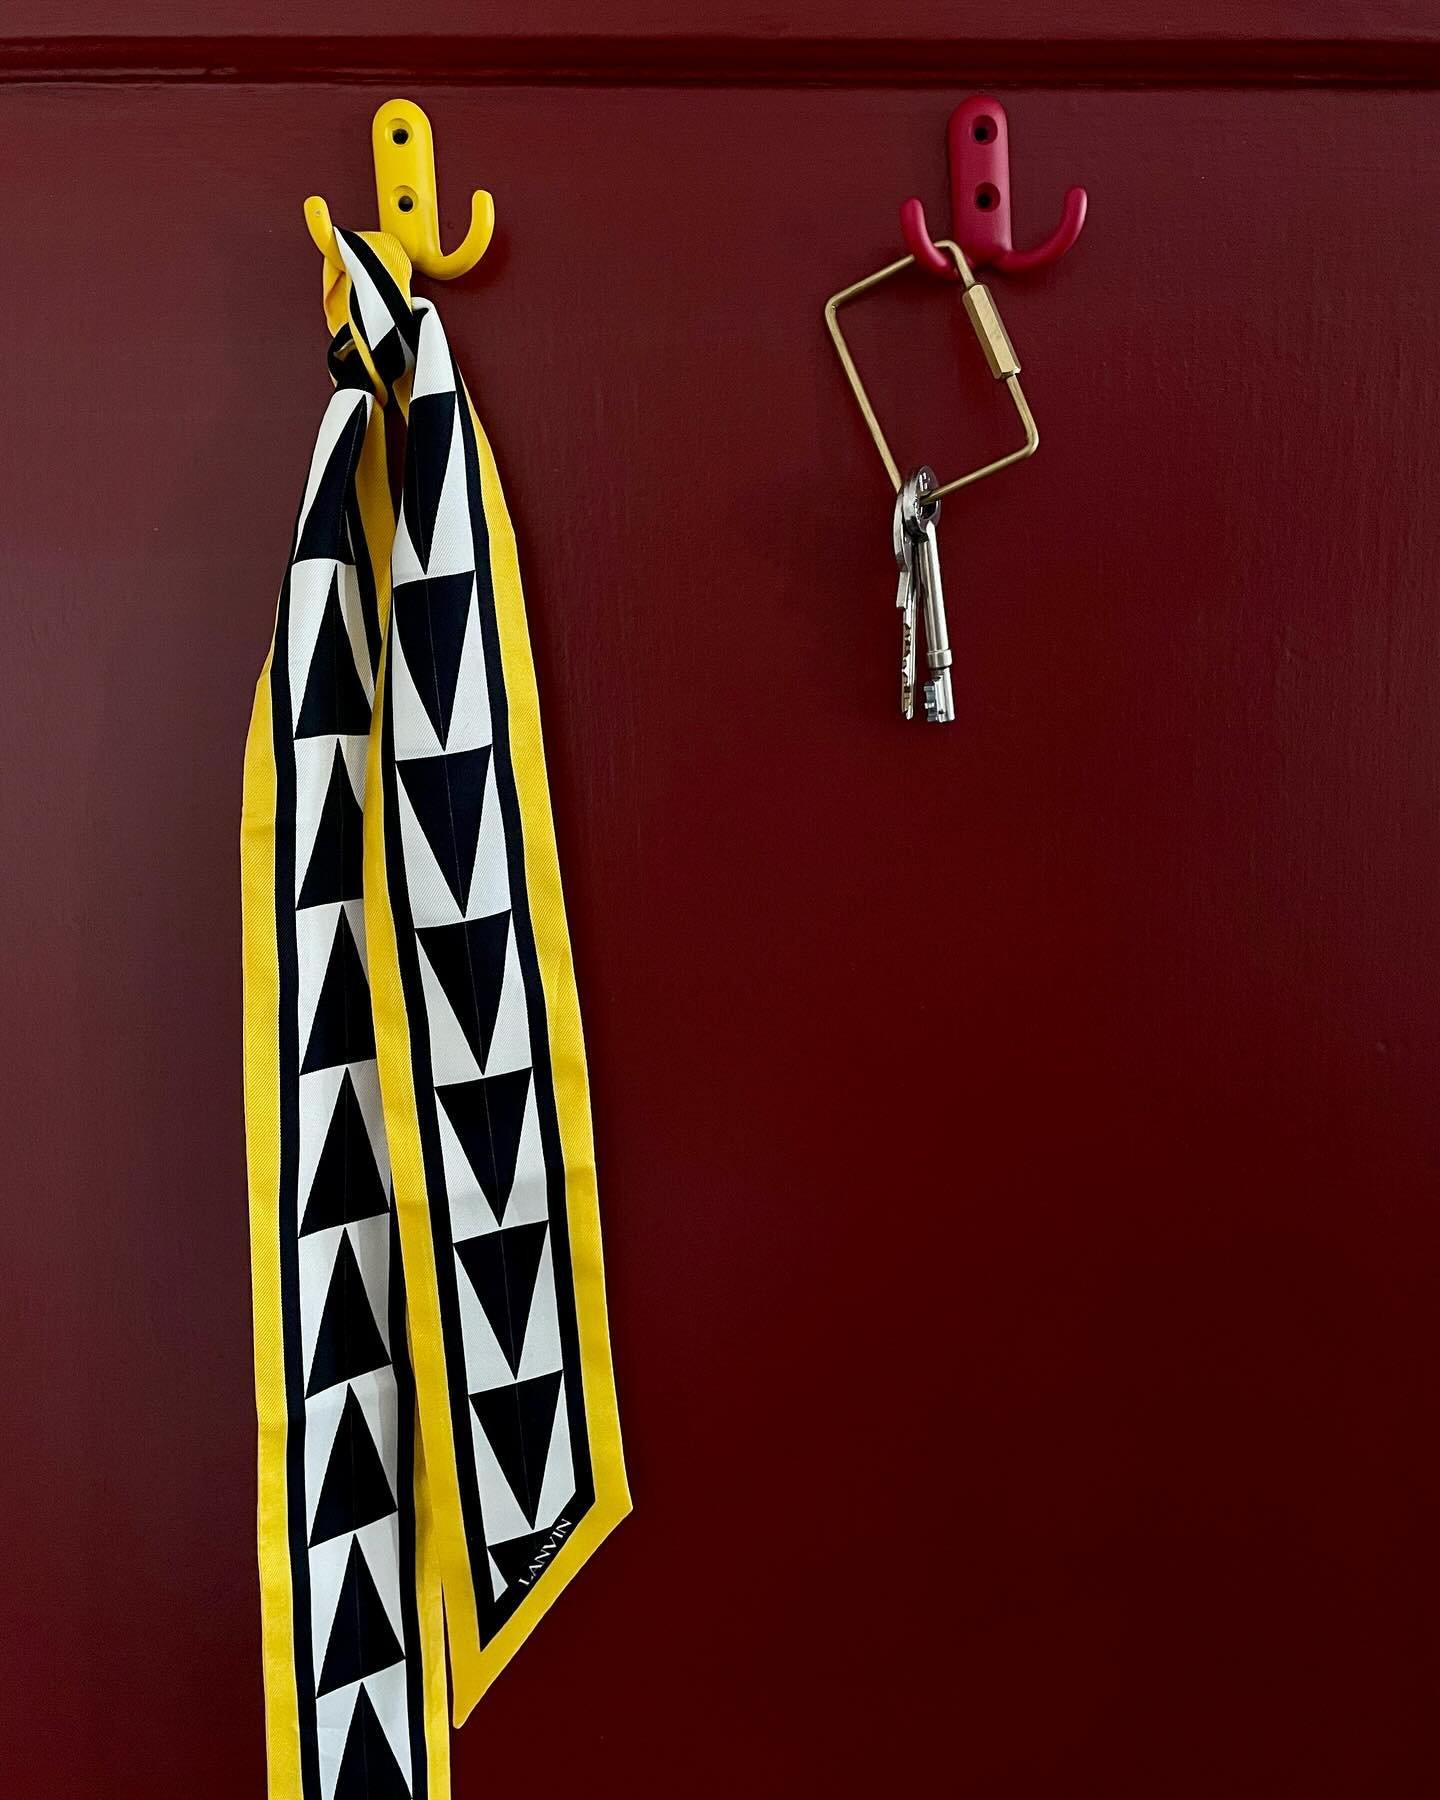 Handy hooks in store, metal powder coated yellow or deep red. Available in New In.
.
.
.
.
#metalhooks